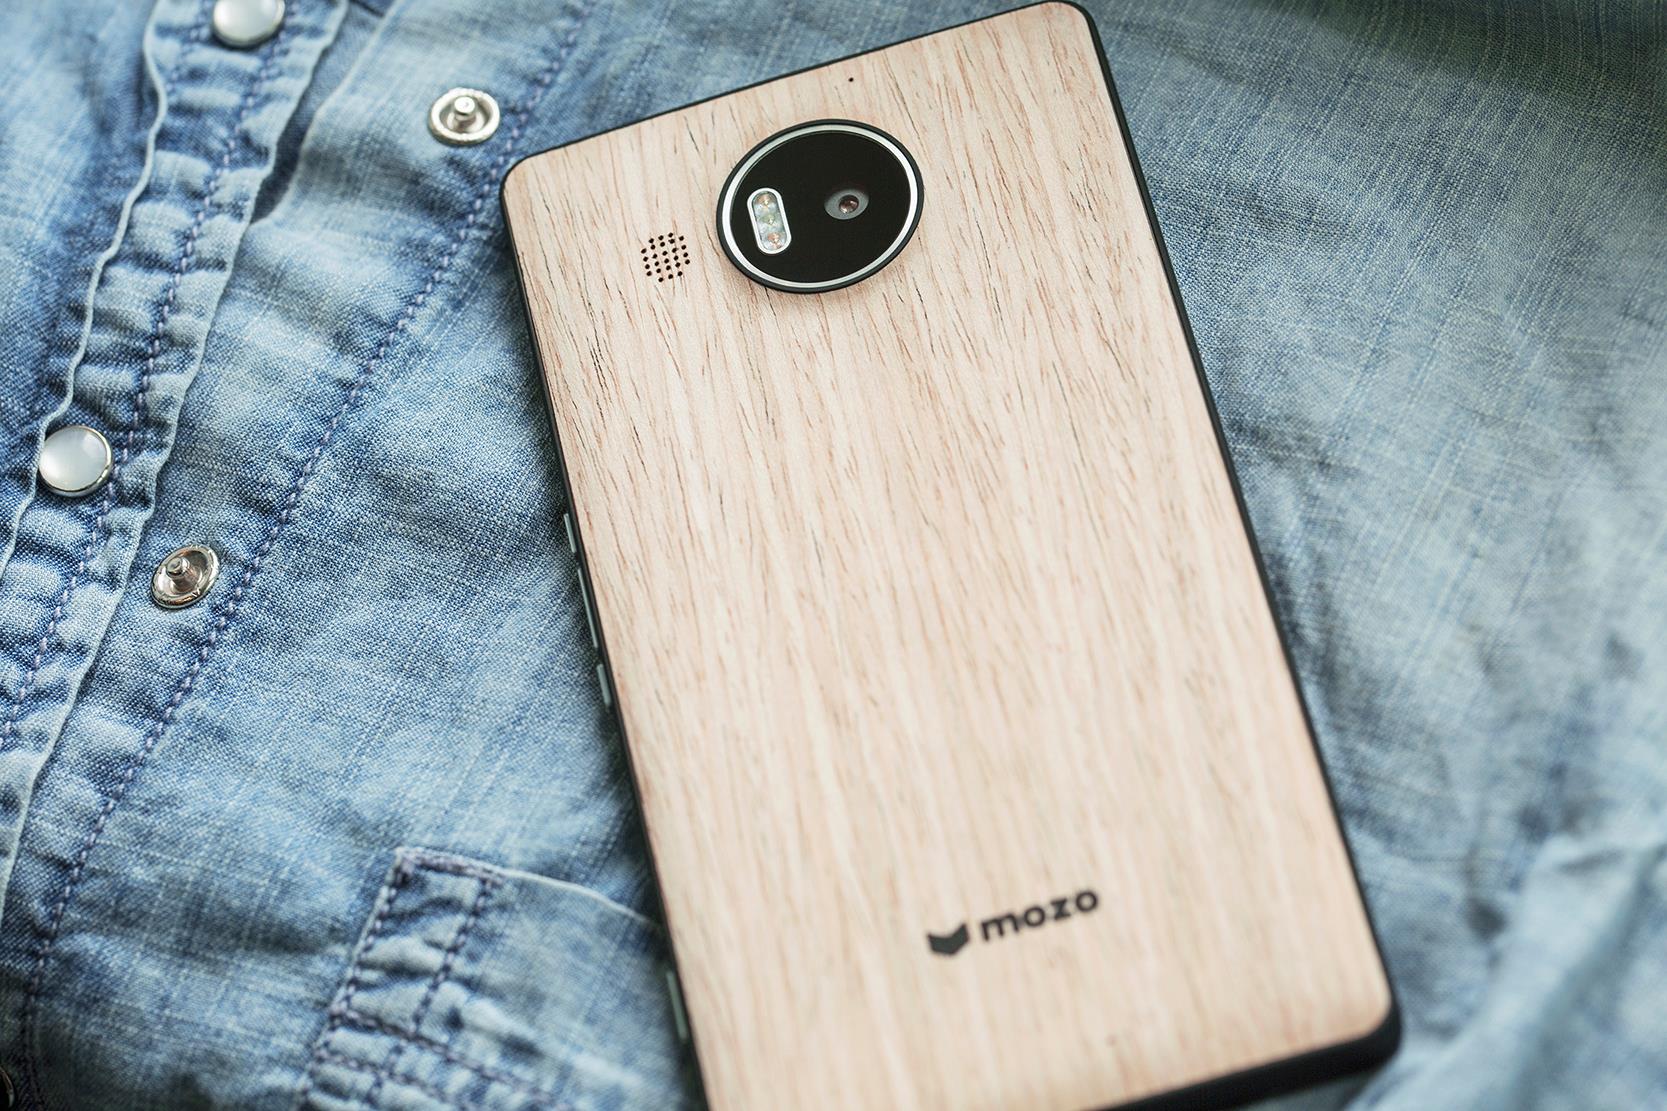 Mozo Wooden Wireless Charging Back Cover For Lumia 950 And Lumia 950 XL Now Available For Pre-Order